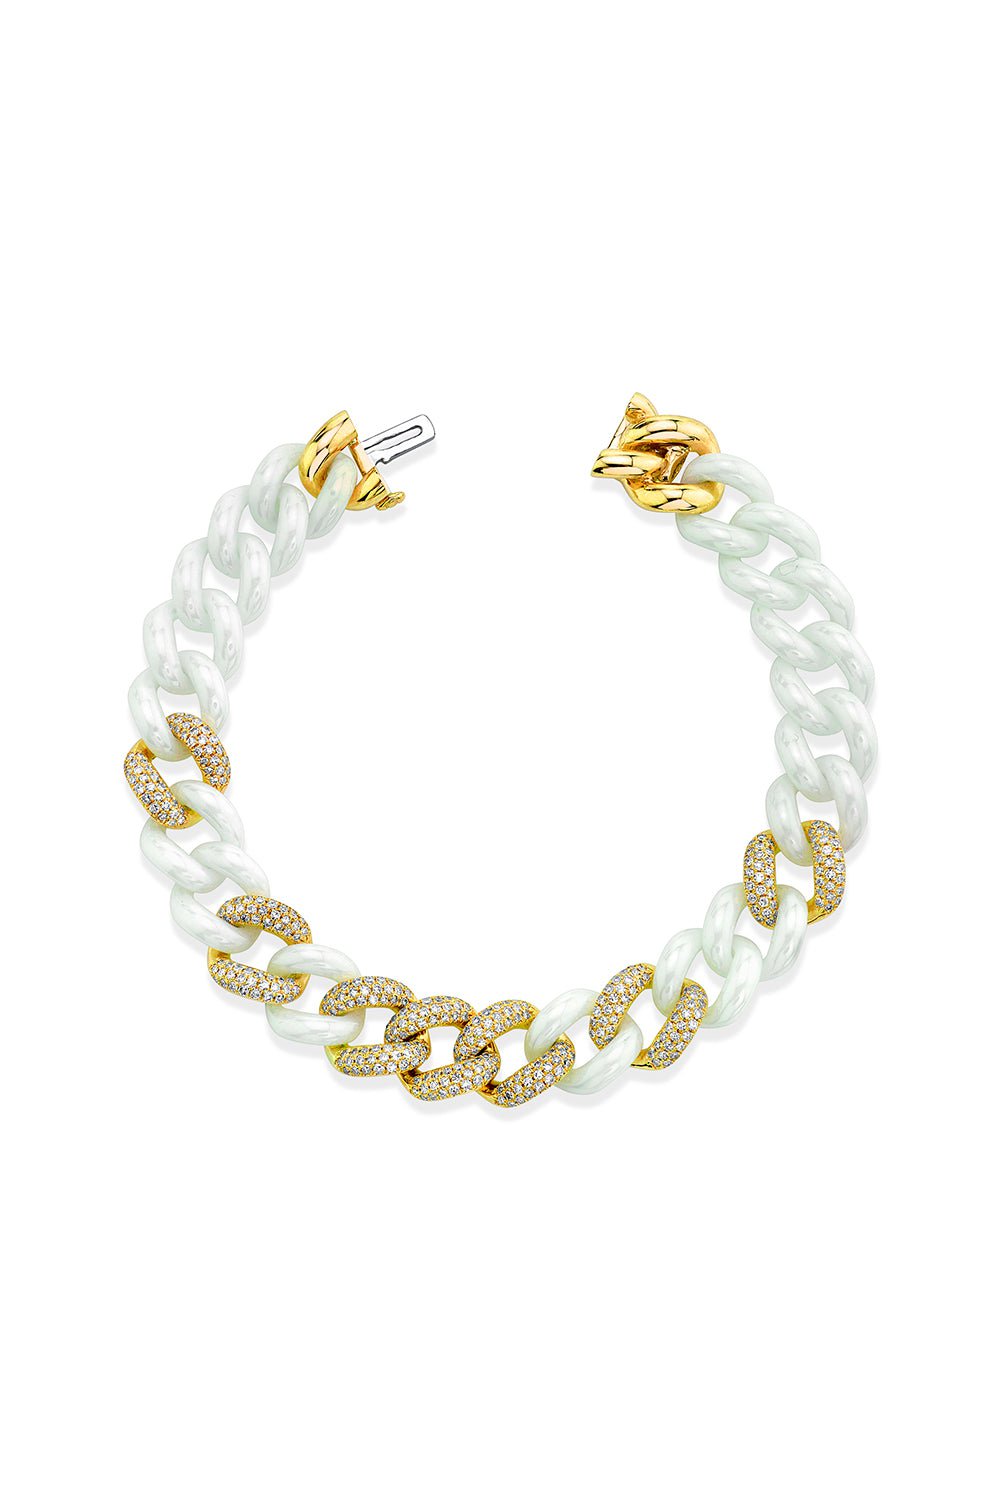 SHAY JEWELRY-Pave White Ceramic Essential Link Bracelet-YELLOW GOLD